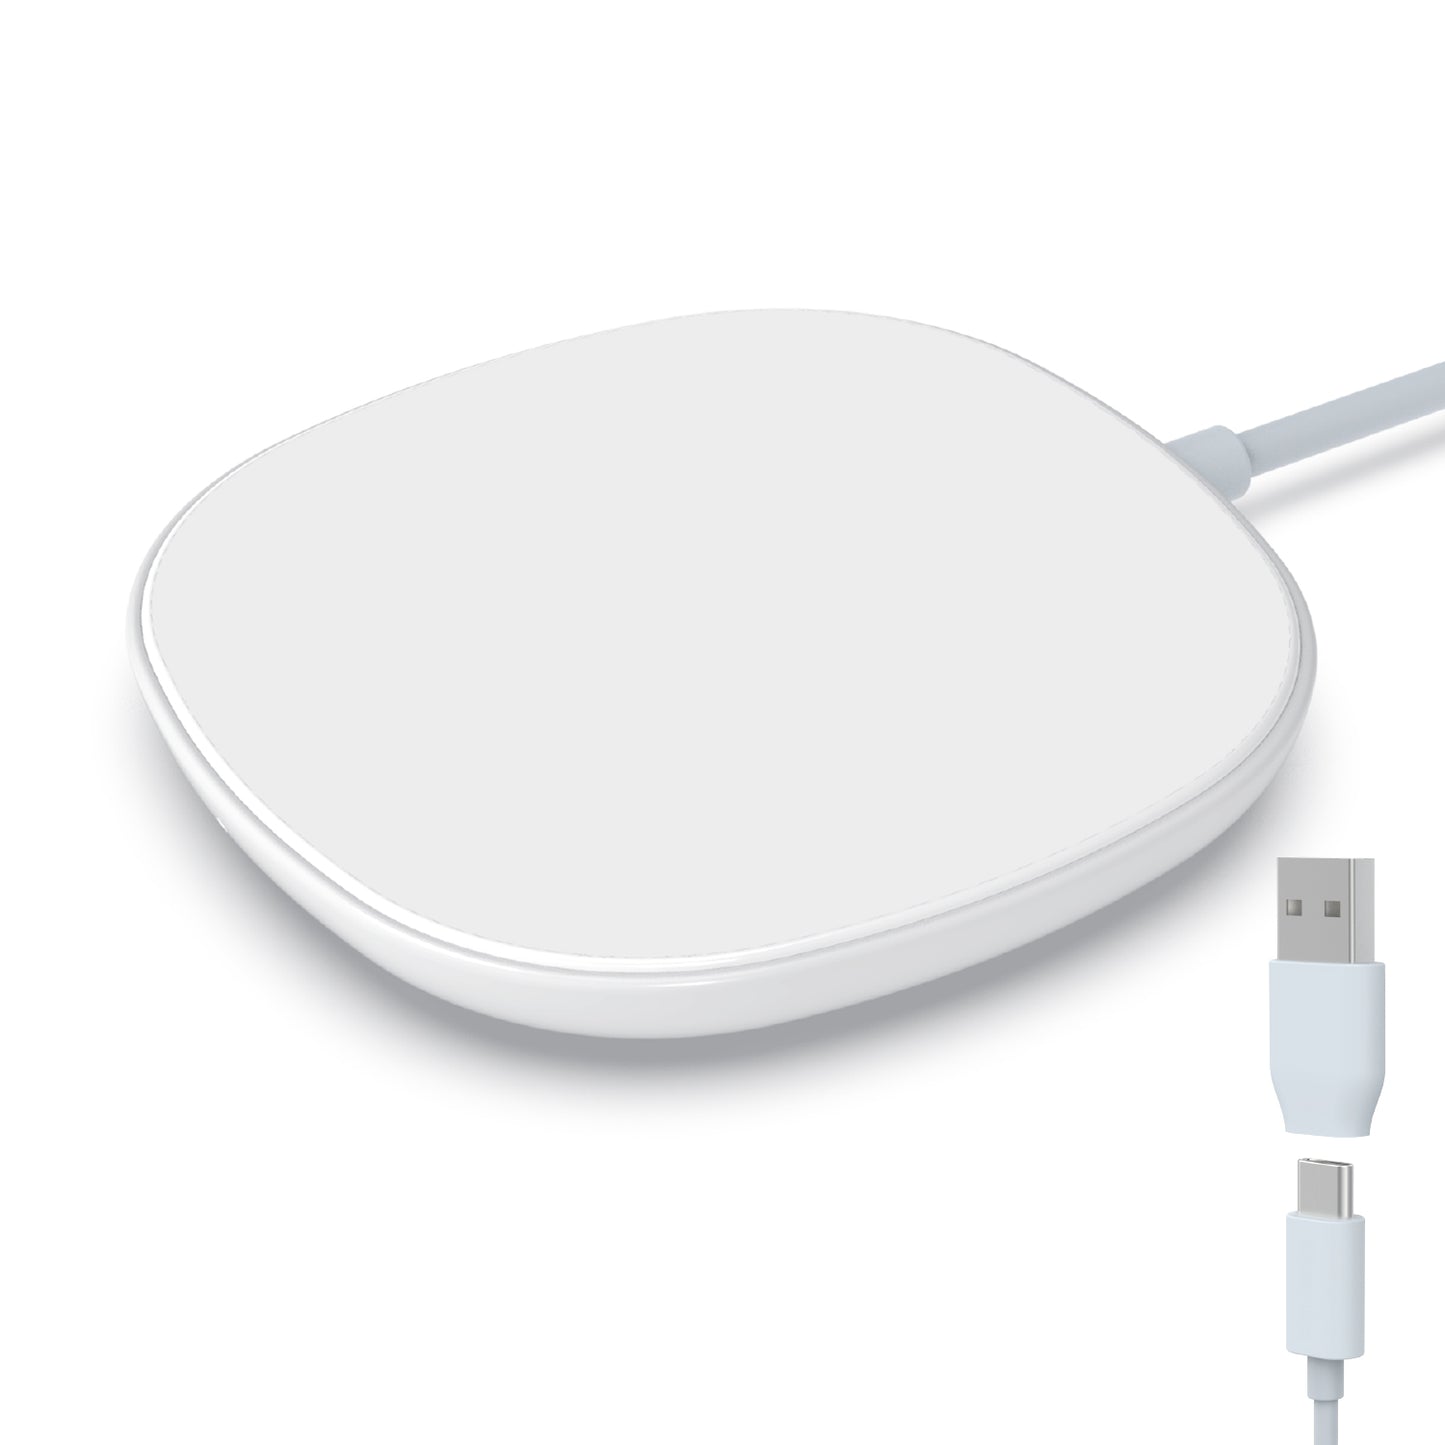 MAGWAL30 - MagSafe Magnetic Fast Wireless Charger with USB-C Charging Cable all New iPhones - White